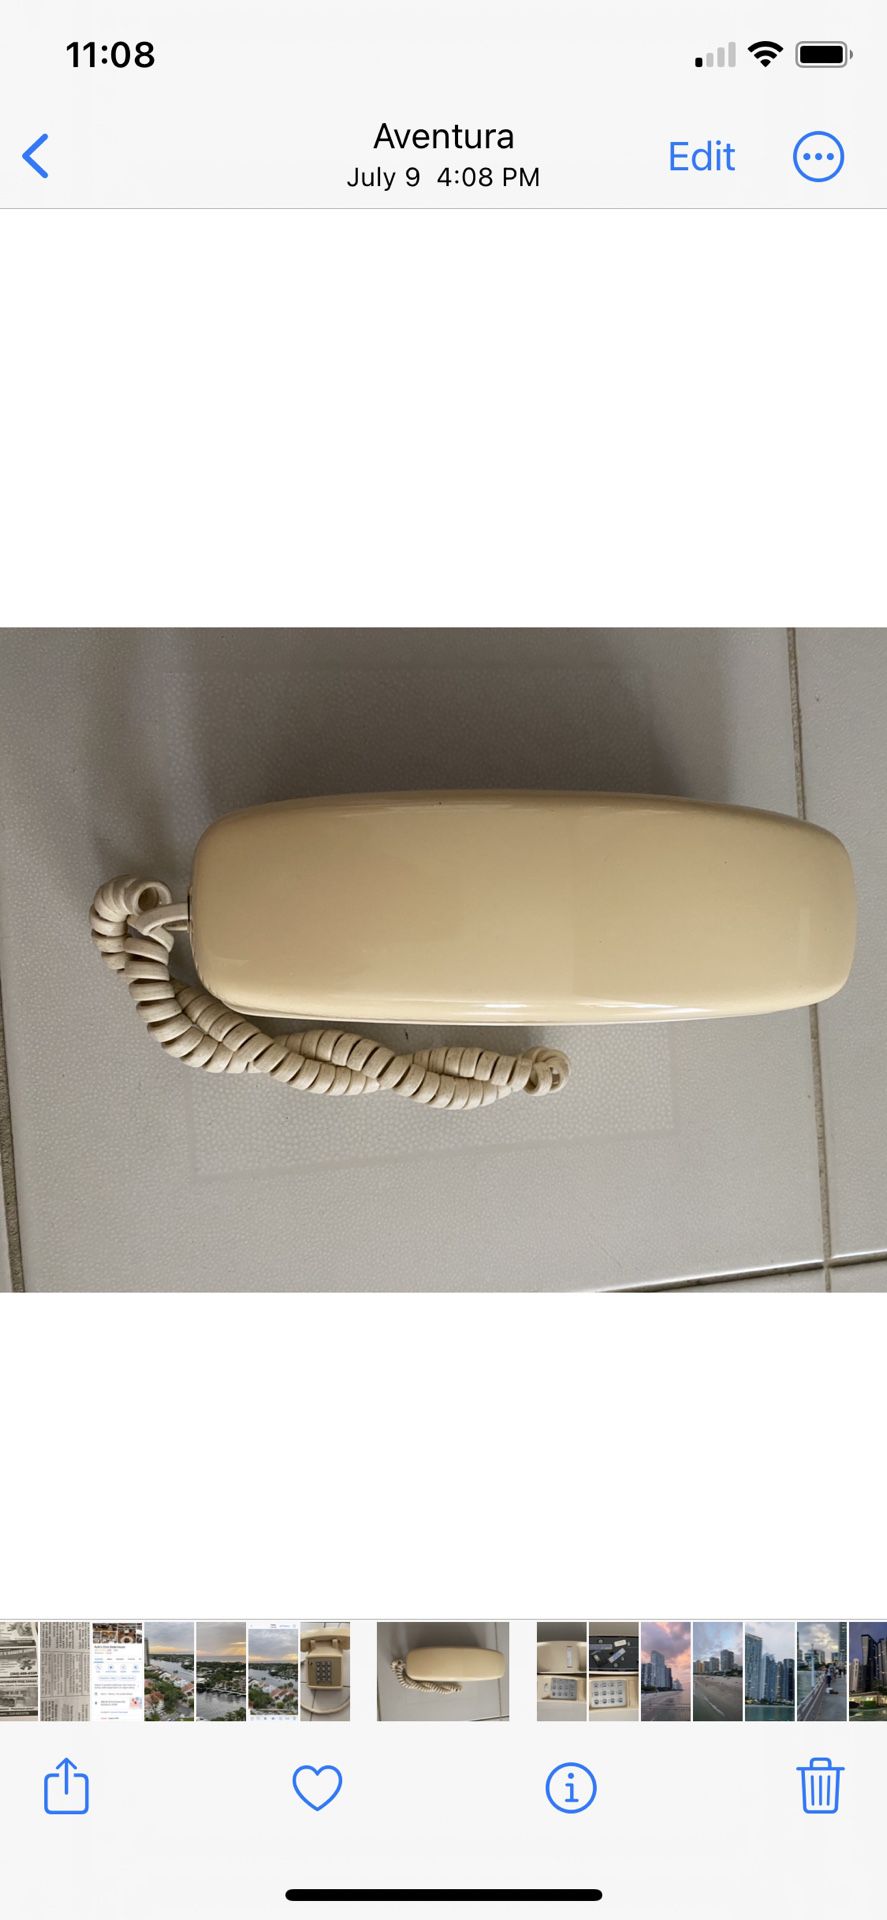 Vintage Phone for The Table &Wall